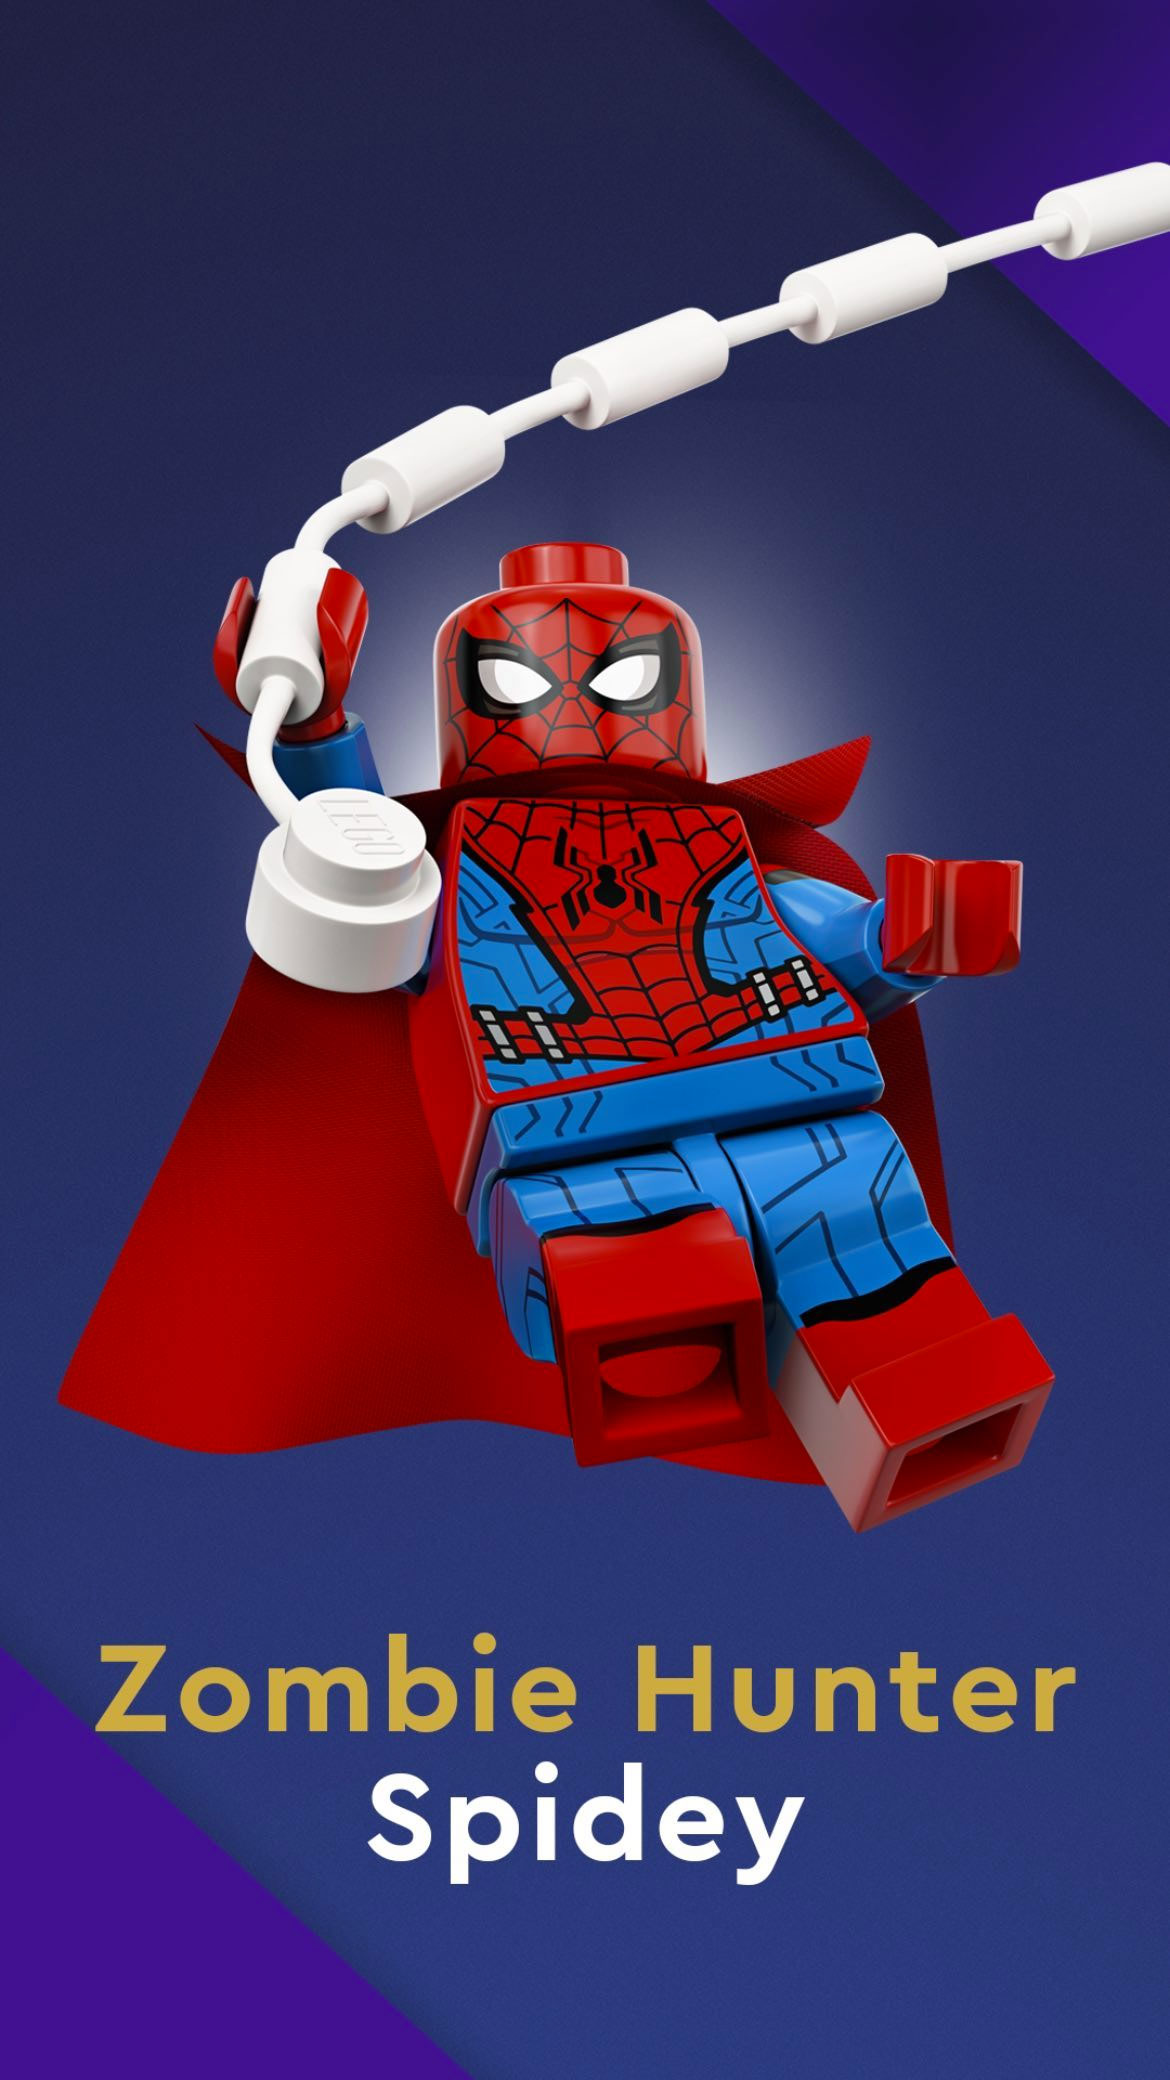 NEW LEGO MARVEL CUSTOM SPIDER-MAN PETER PARKER MINIFIGURE MADE OF LEGO PARTS 